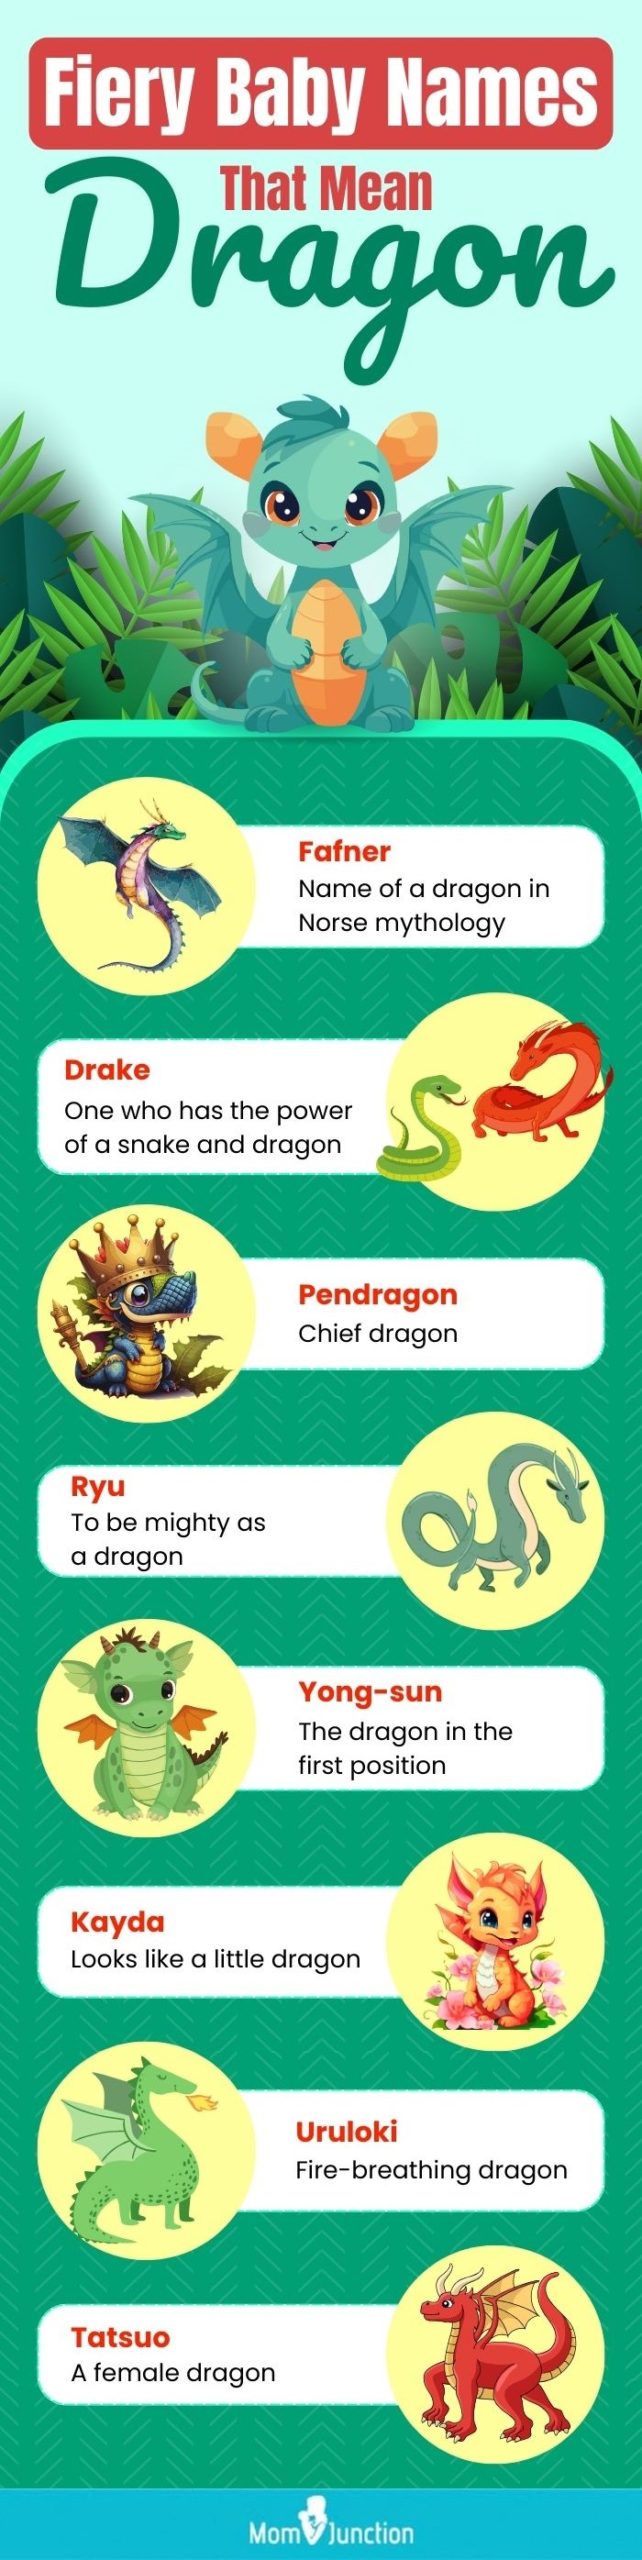 fiery baby names that mean dragon (infographic)